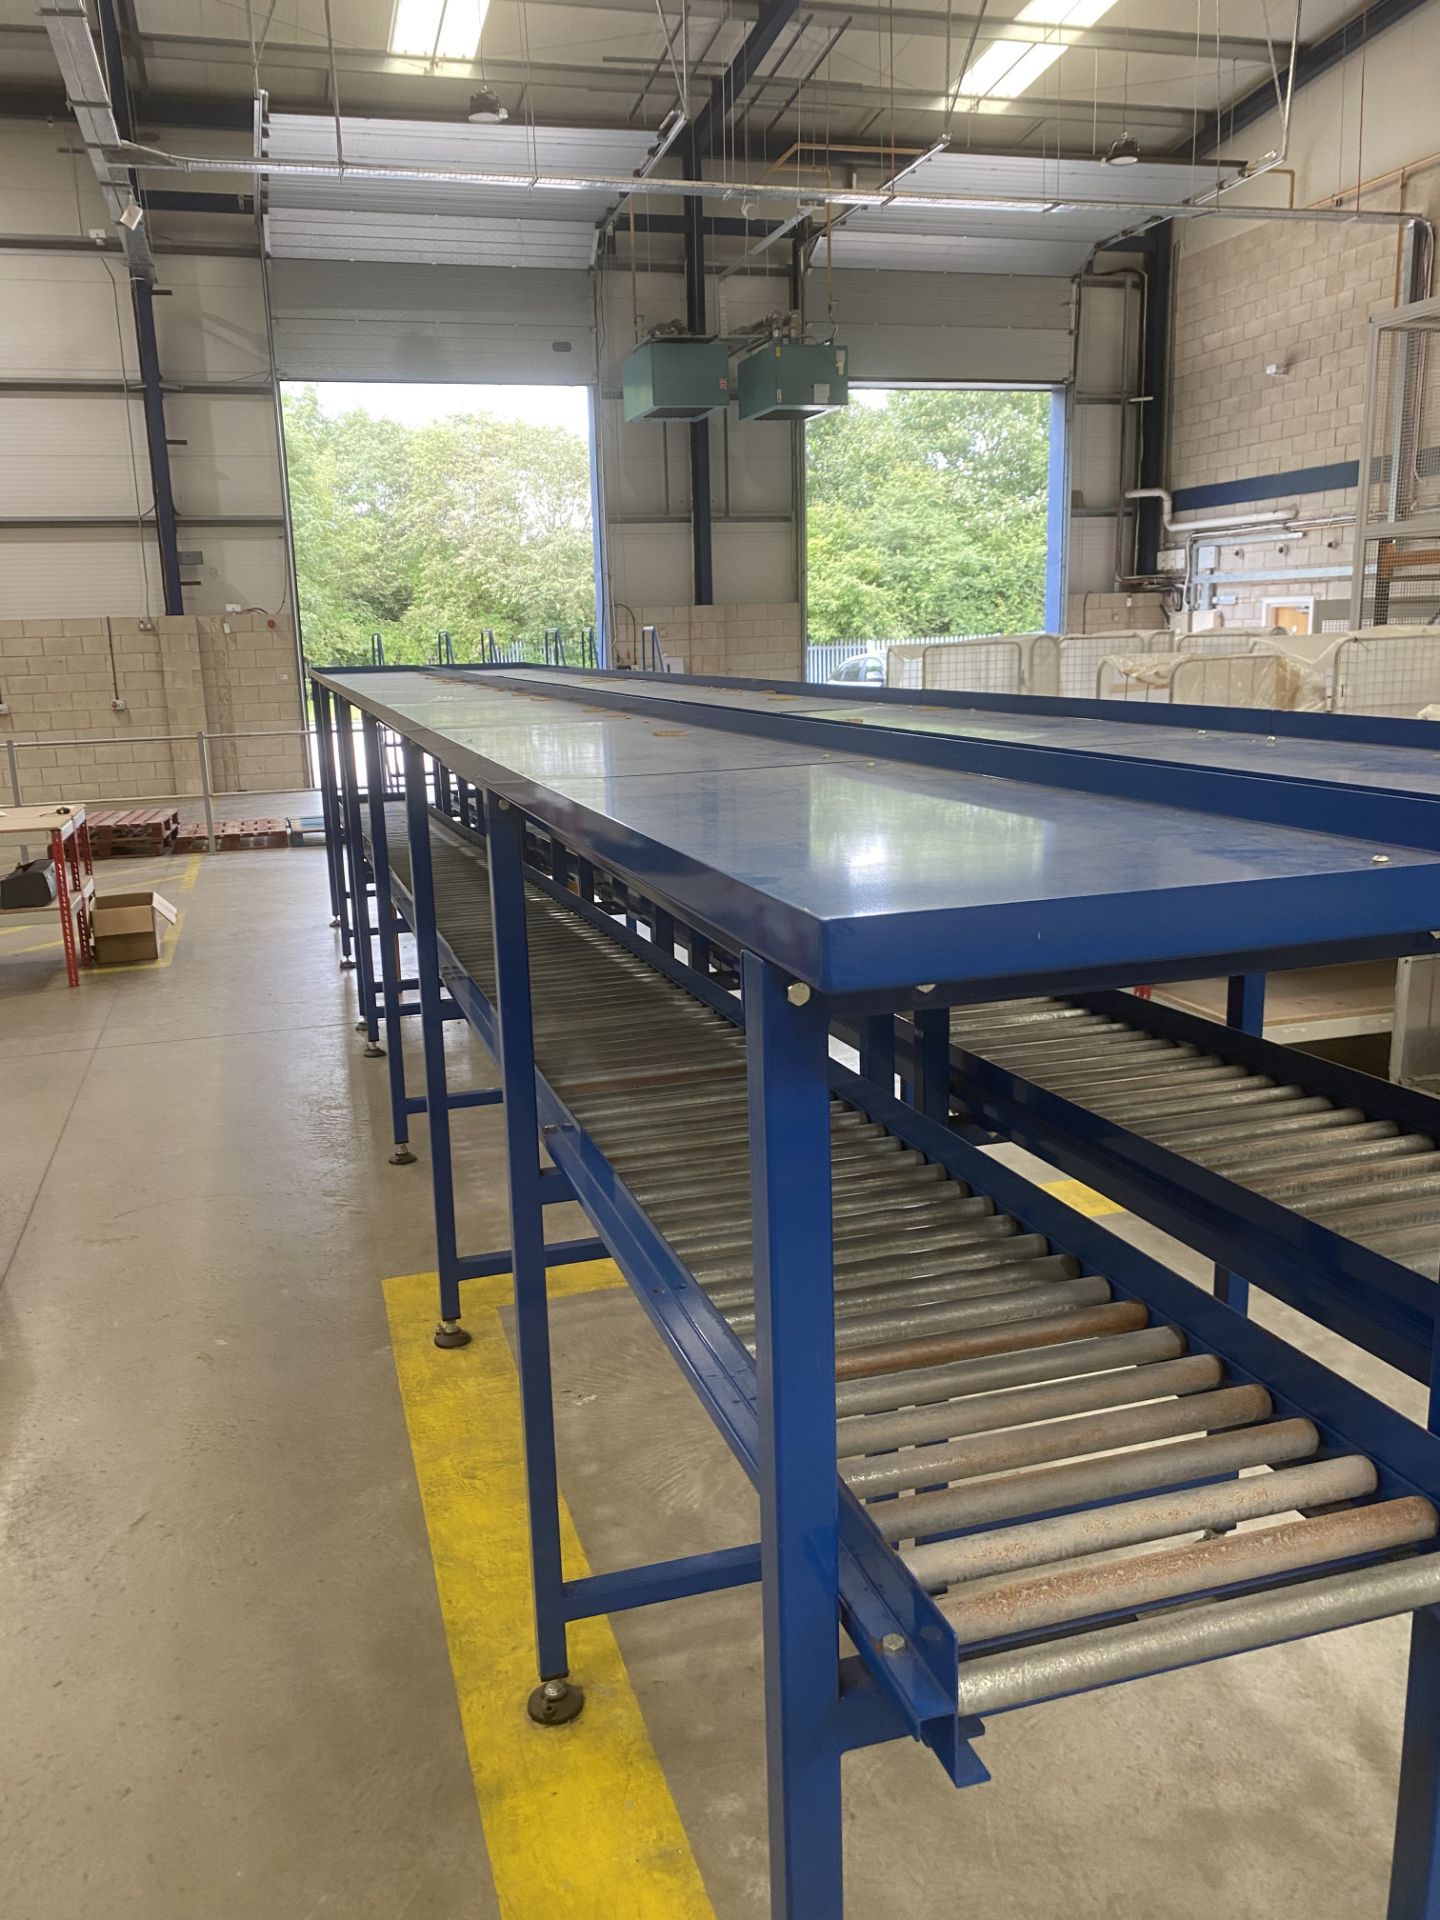 WAREHOUSE ROLLER CONVEYOR SYSTEM WITH TOP SHELF STORAGE 9.5M (3 SECTIONS OF 3M - CAN BE DISMANTLED) - Image 2 of 5